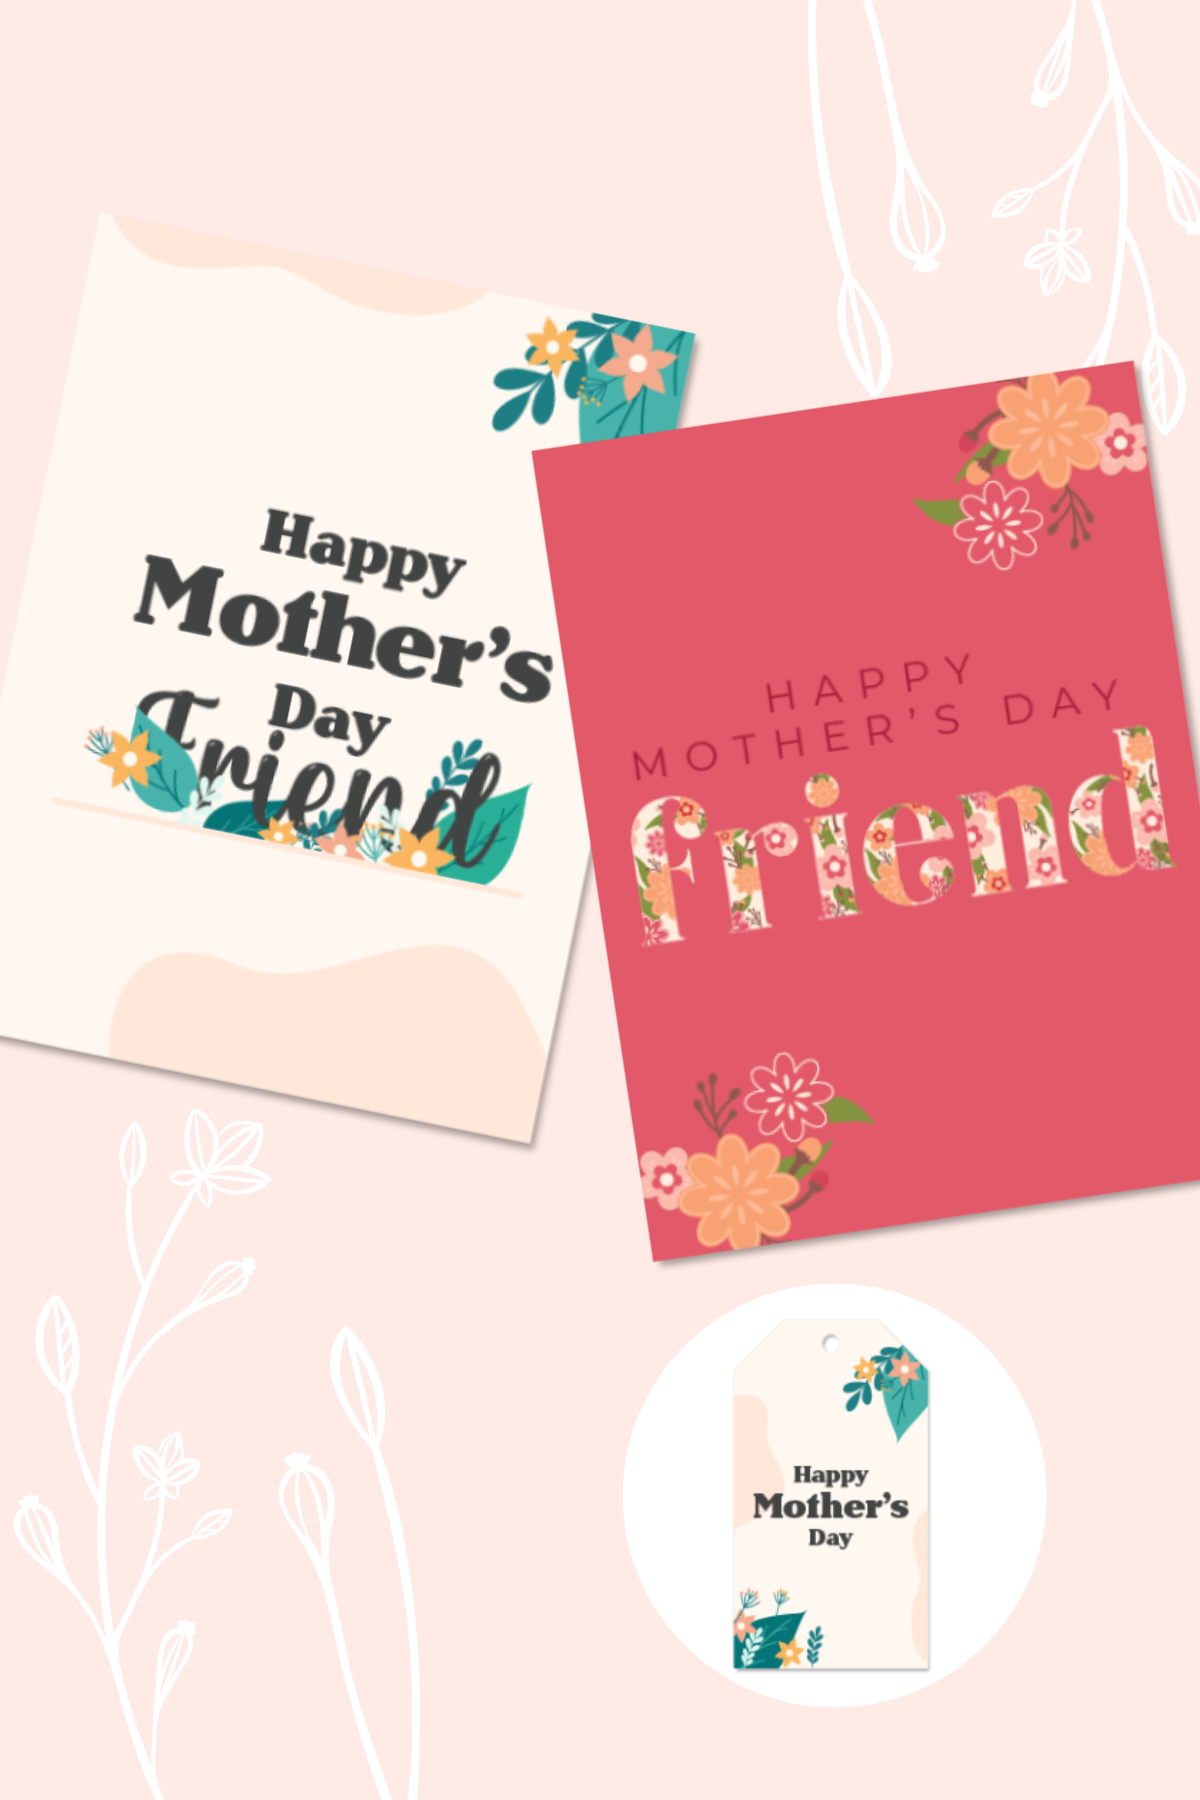 Two printable Happy Mother's Day friend cards over a light pink background.